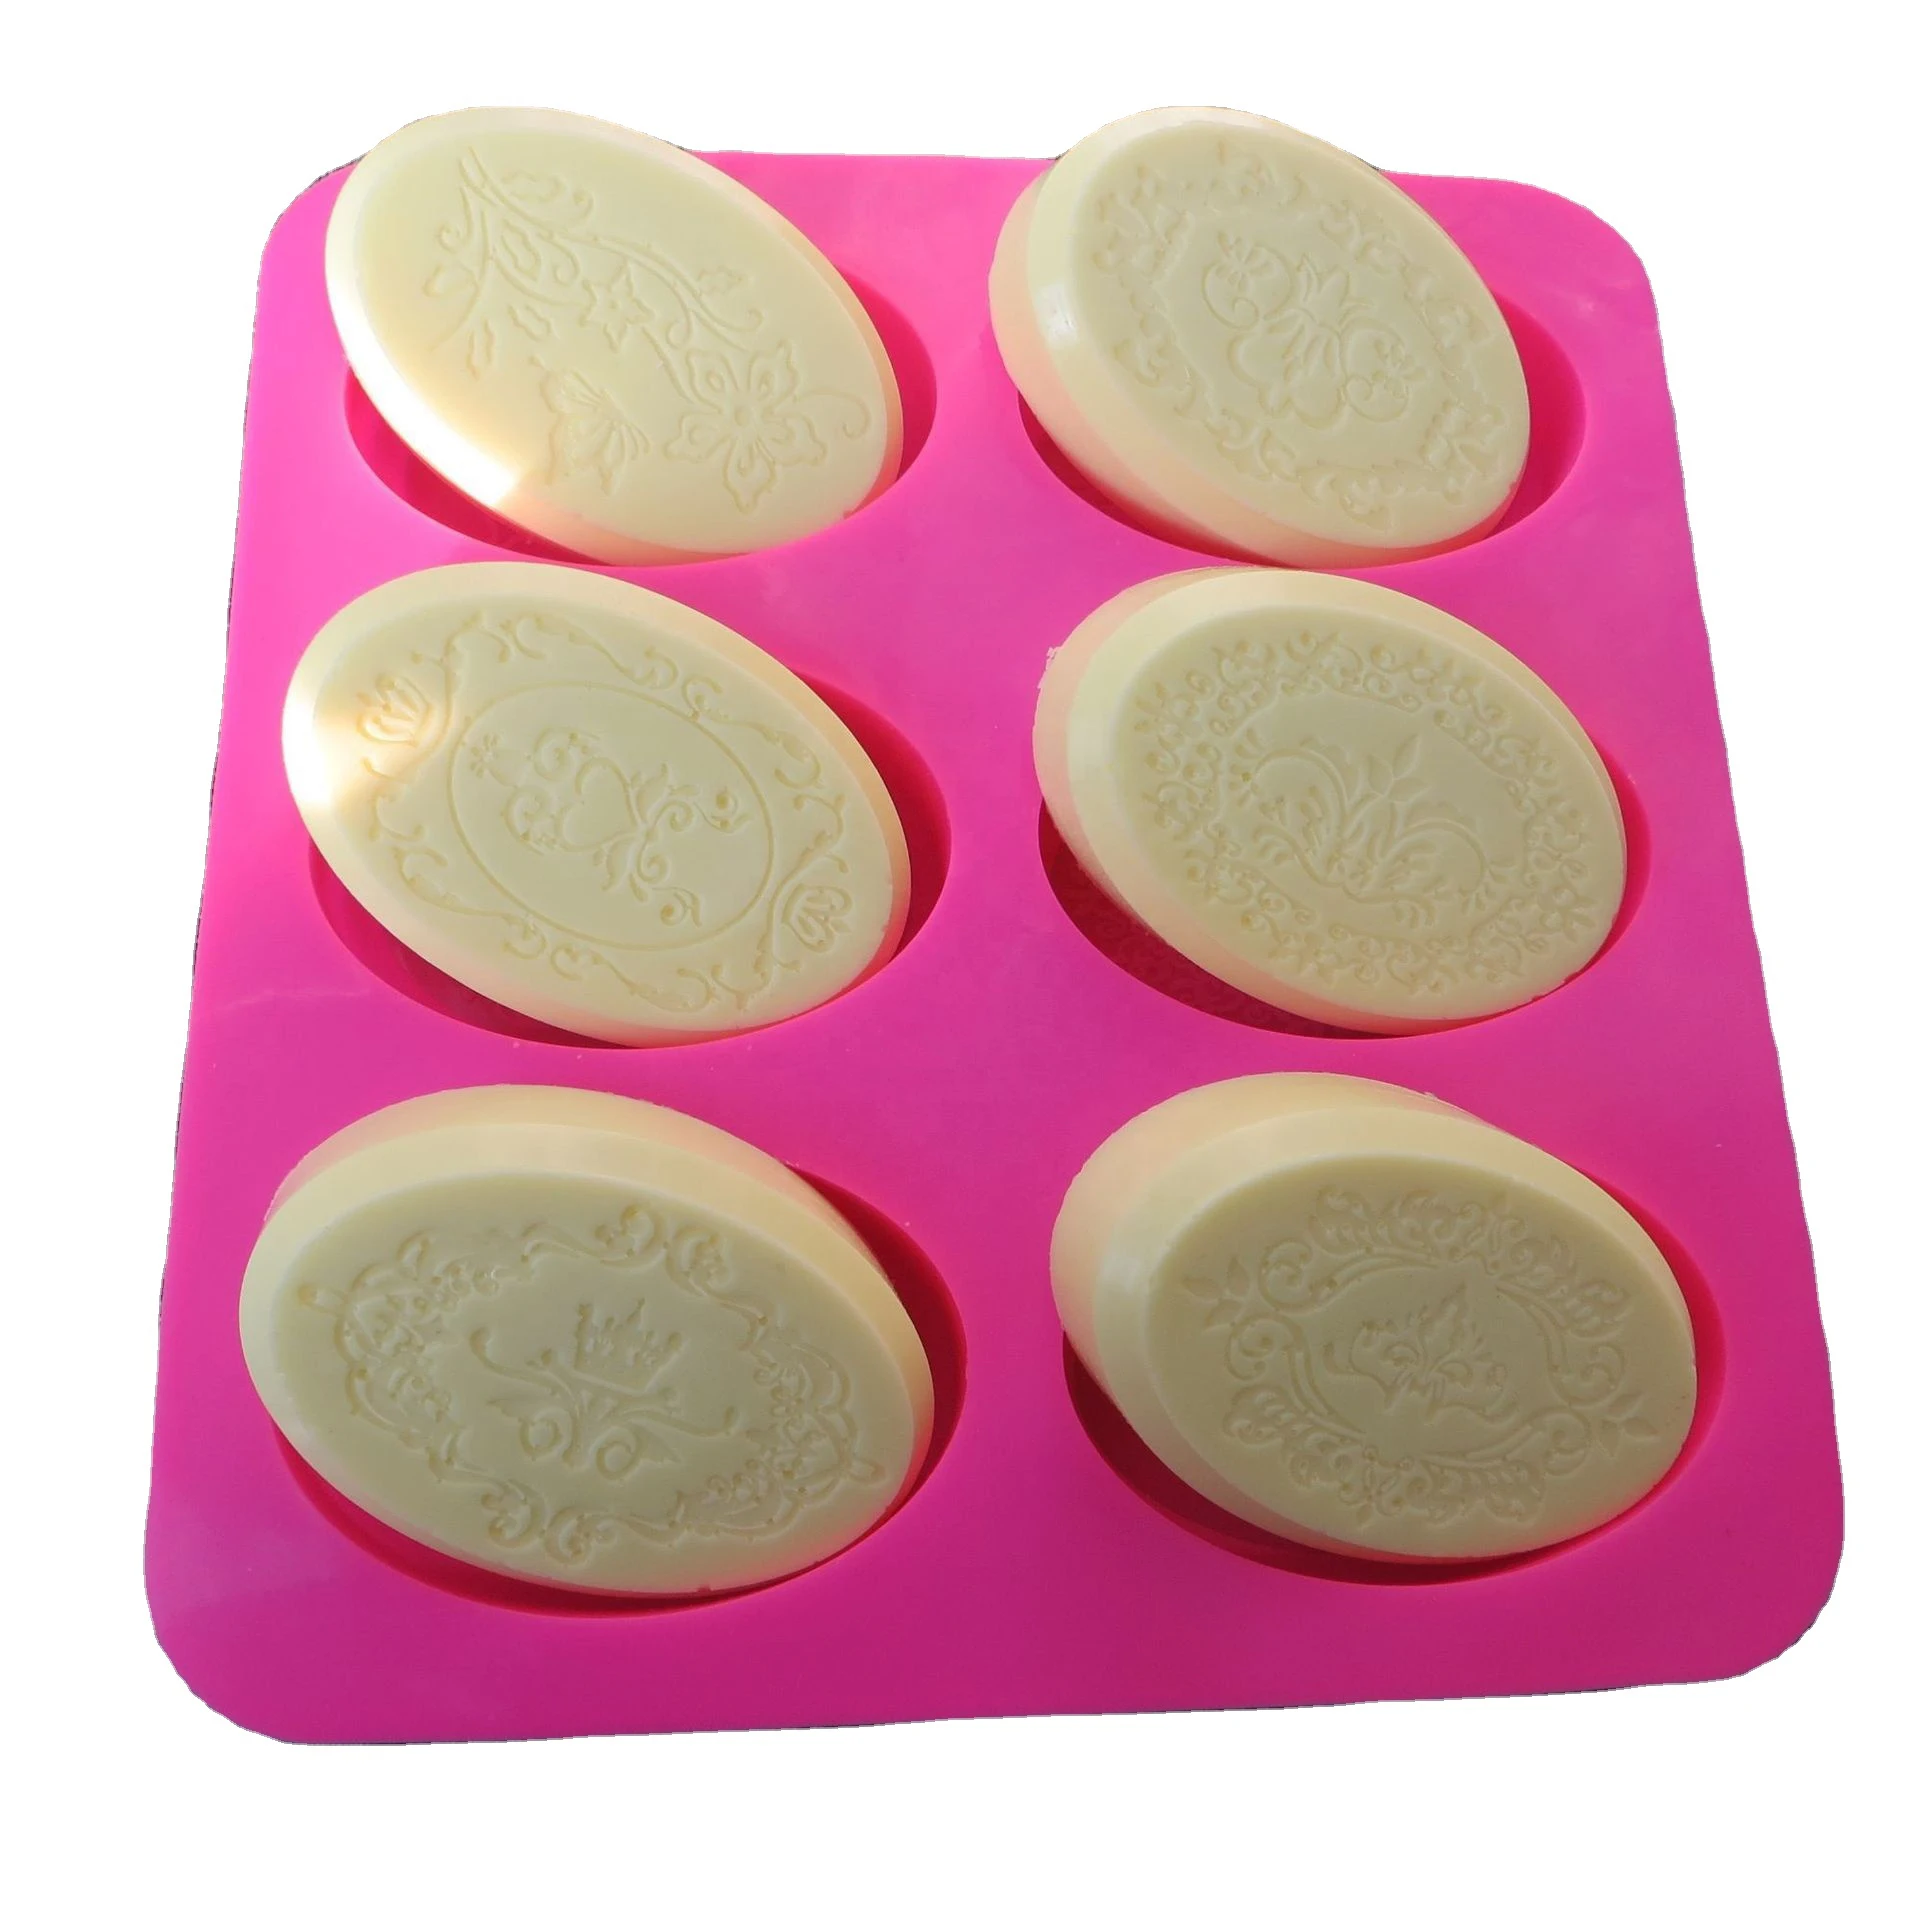 

Newest Product 9 Different Designs Silicone Soap Making,Molds For Handmade,Silicone Mould for Soap, As picture or as your request for silicone soap molds